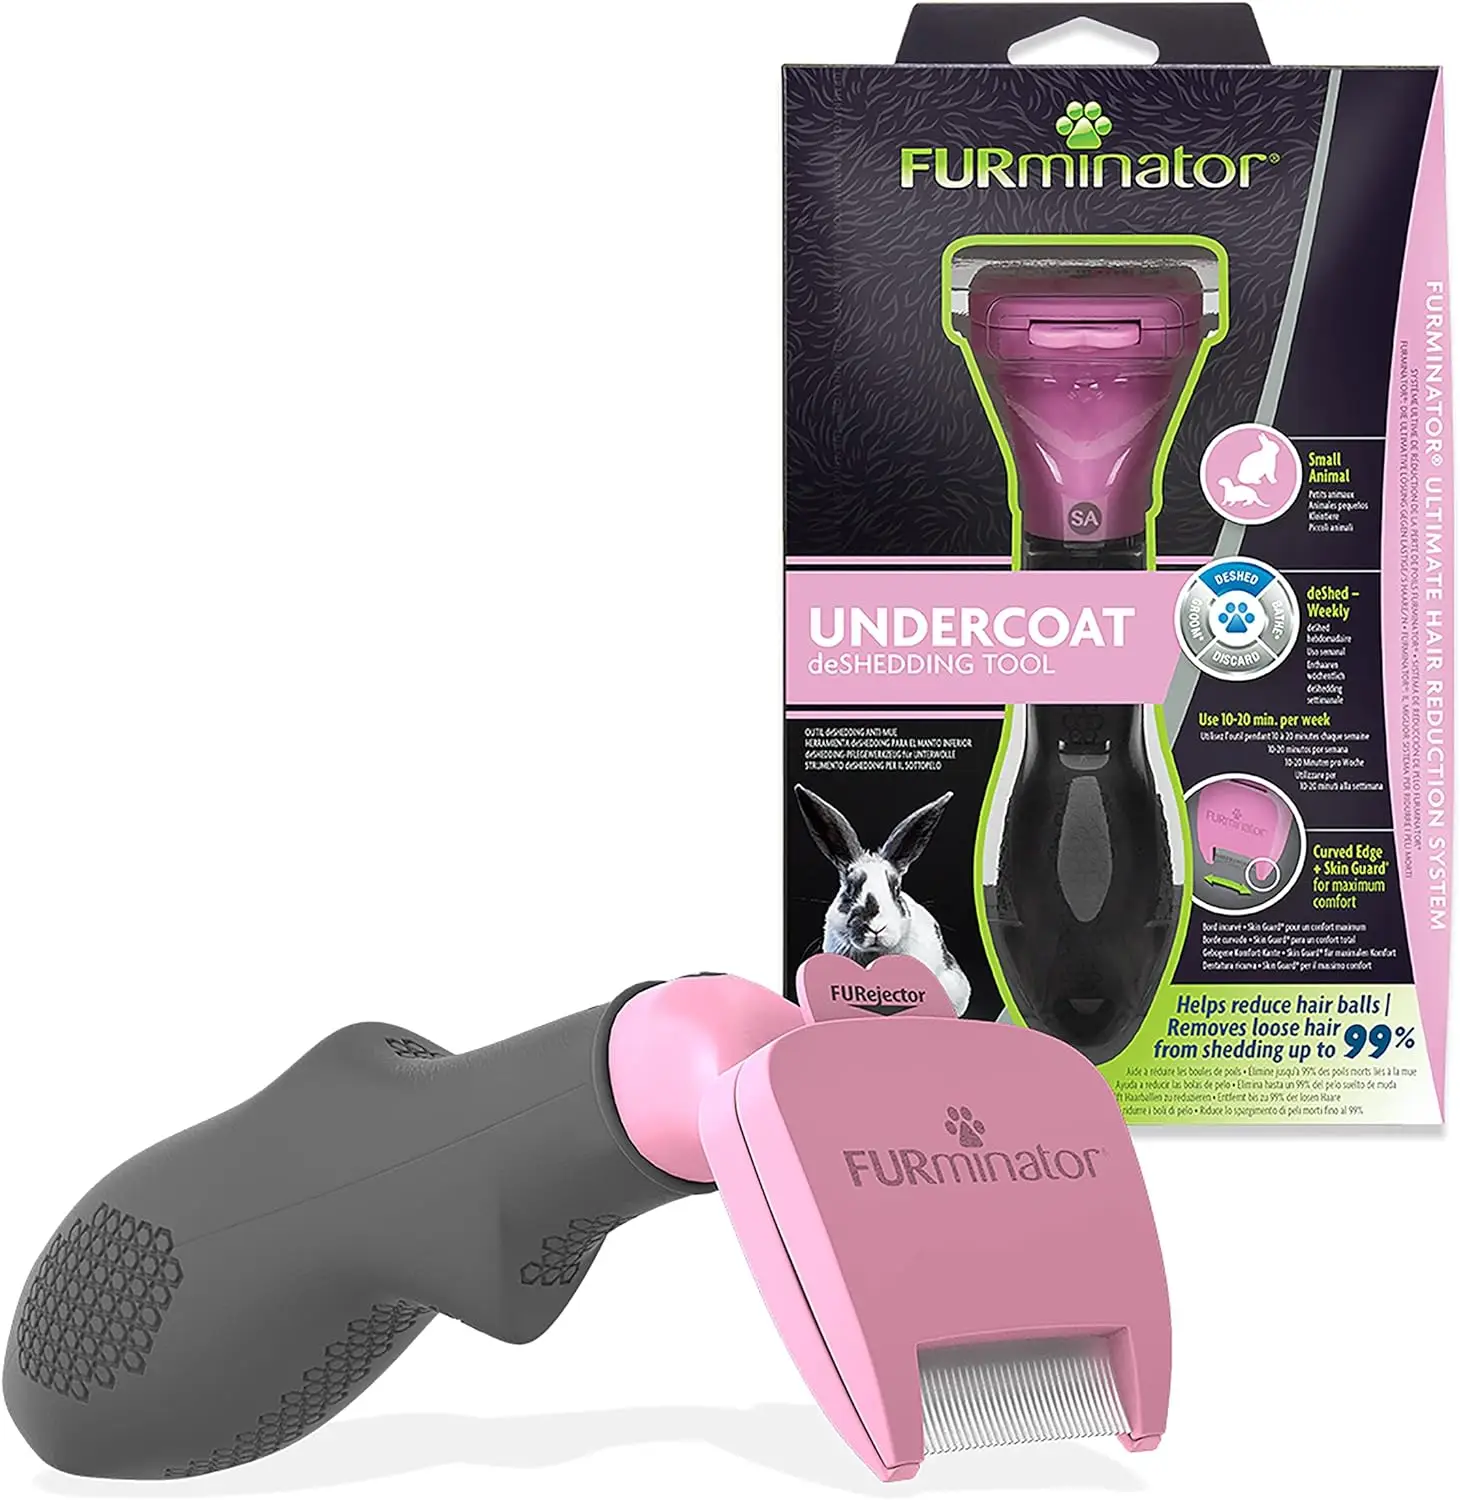 Best brushes for rabbits - Furminator with box